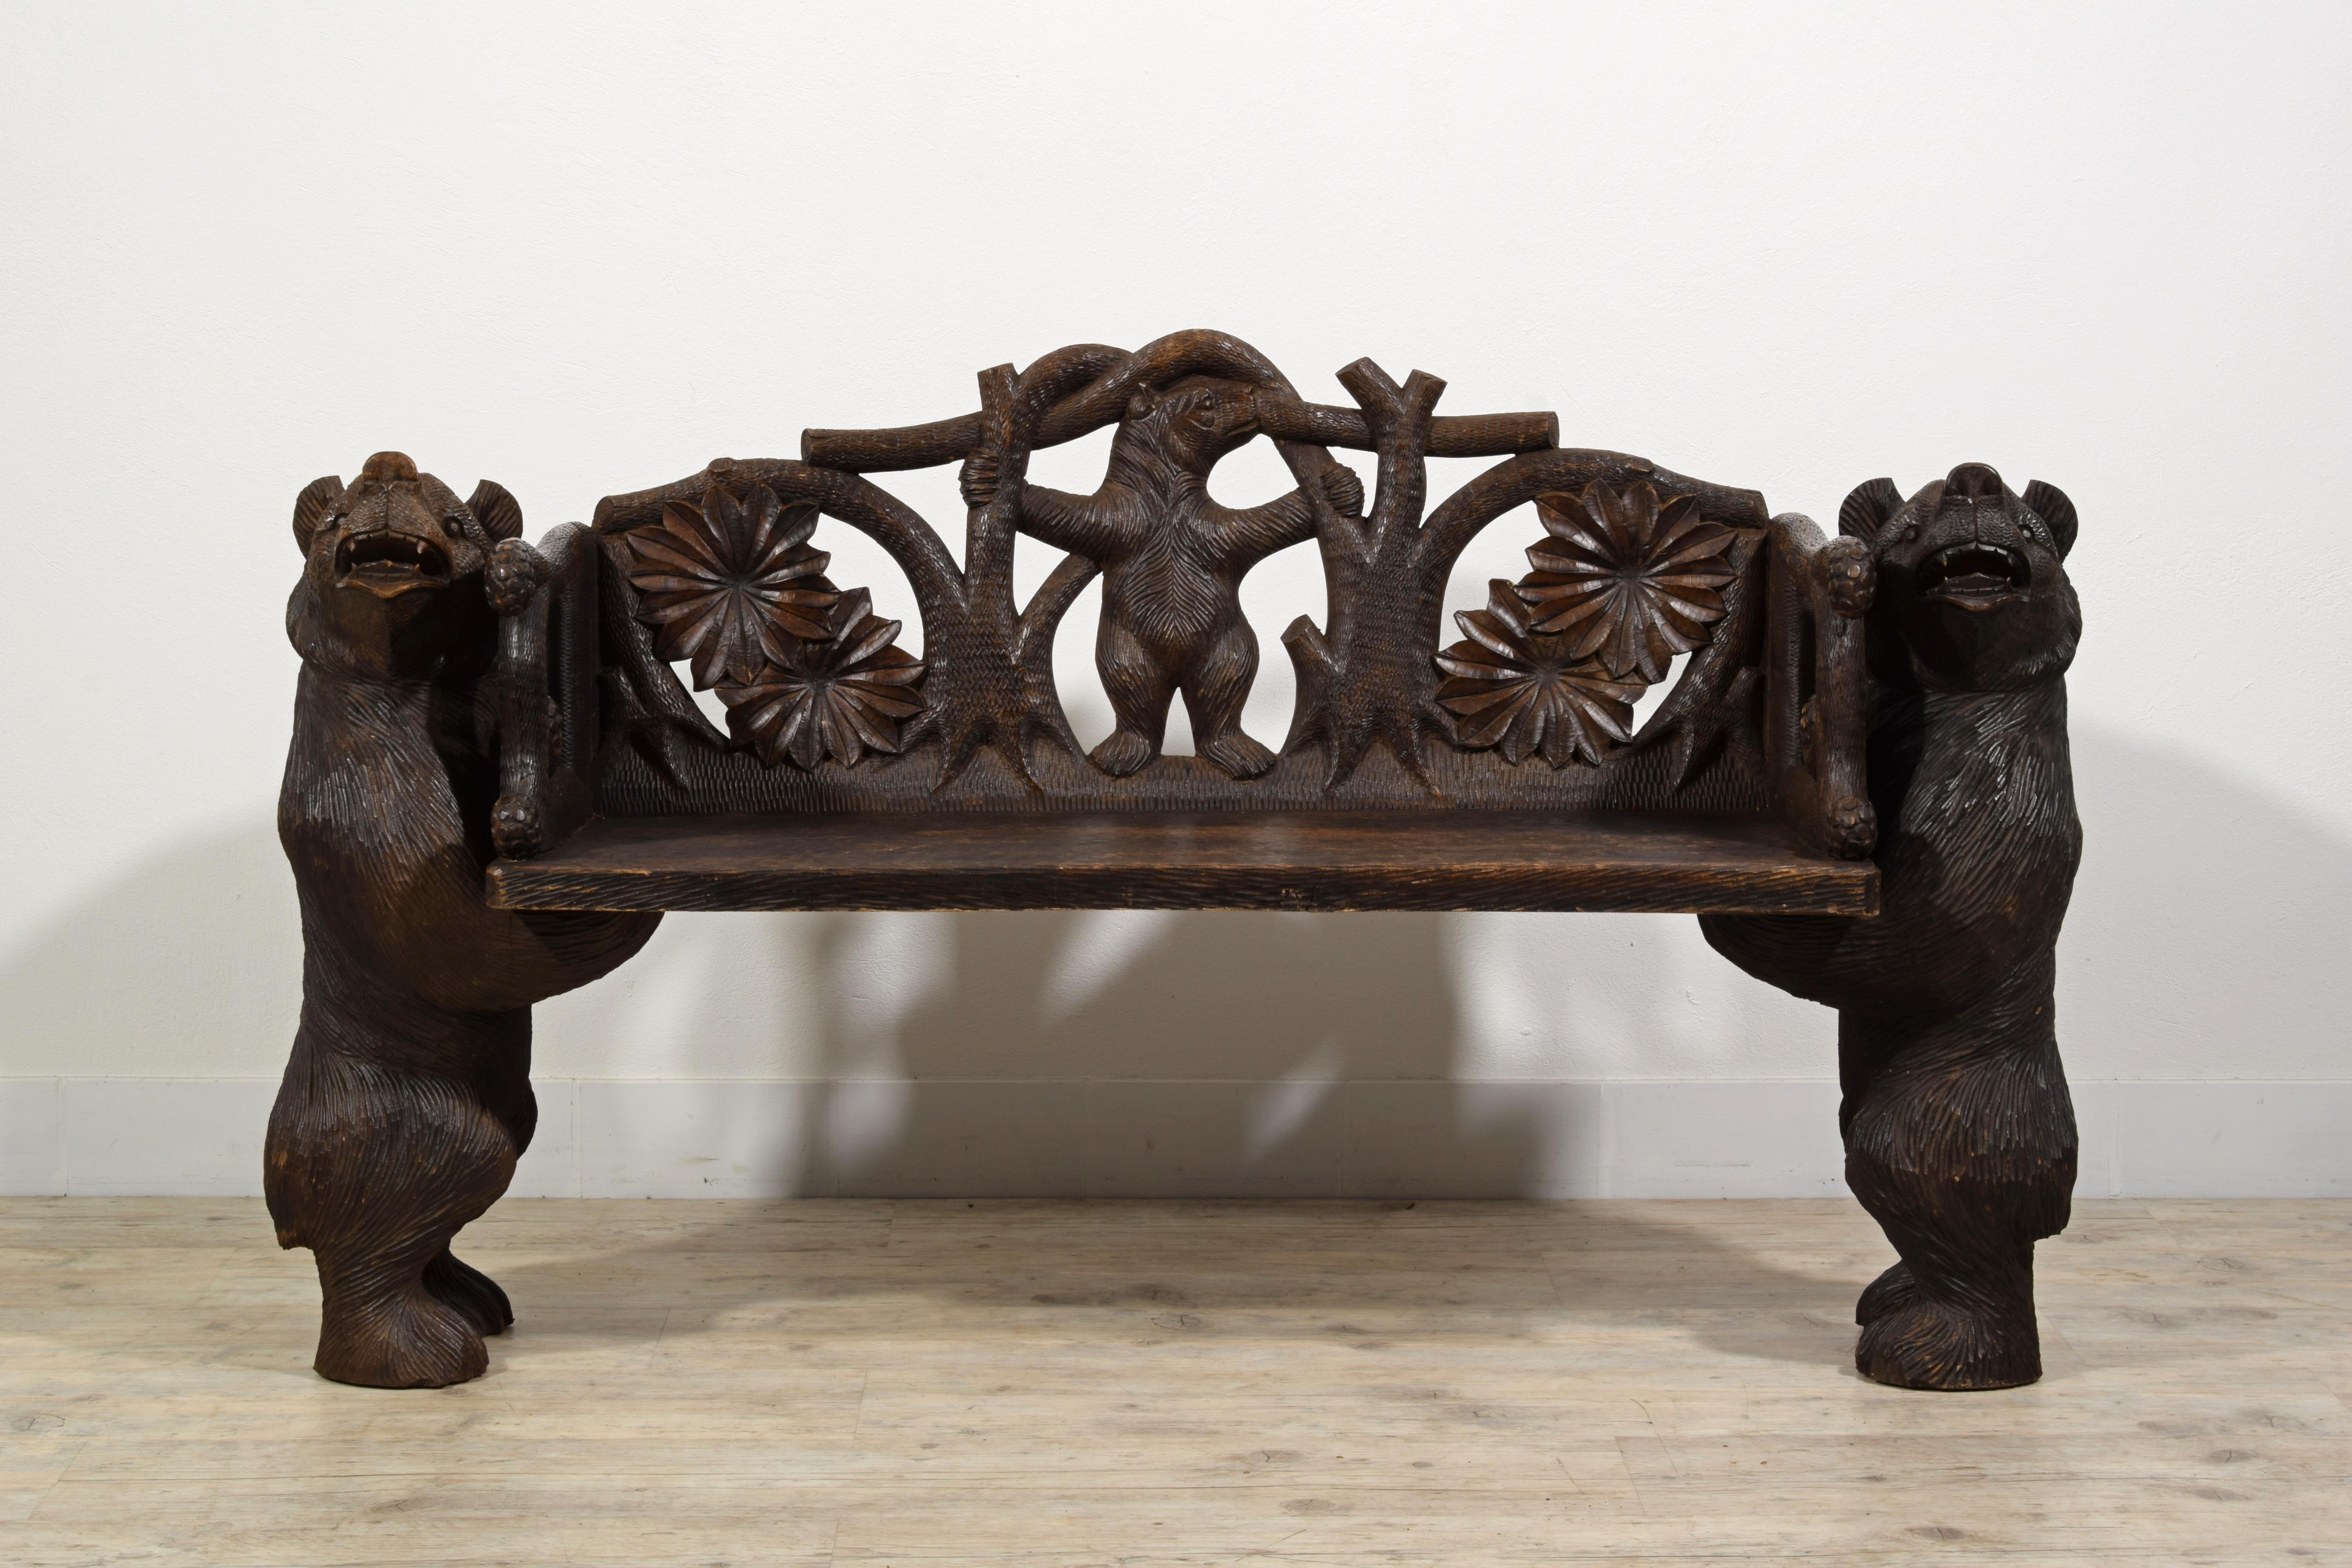 20th century,  Black Forest Brienz Hand Carved Wood bench with Bears 

This particular bench, made of wood carved in the twentieth century, is an artifact from the city of Brienz in Switzerland. The type of artifact is called 